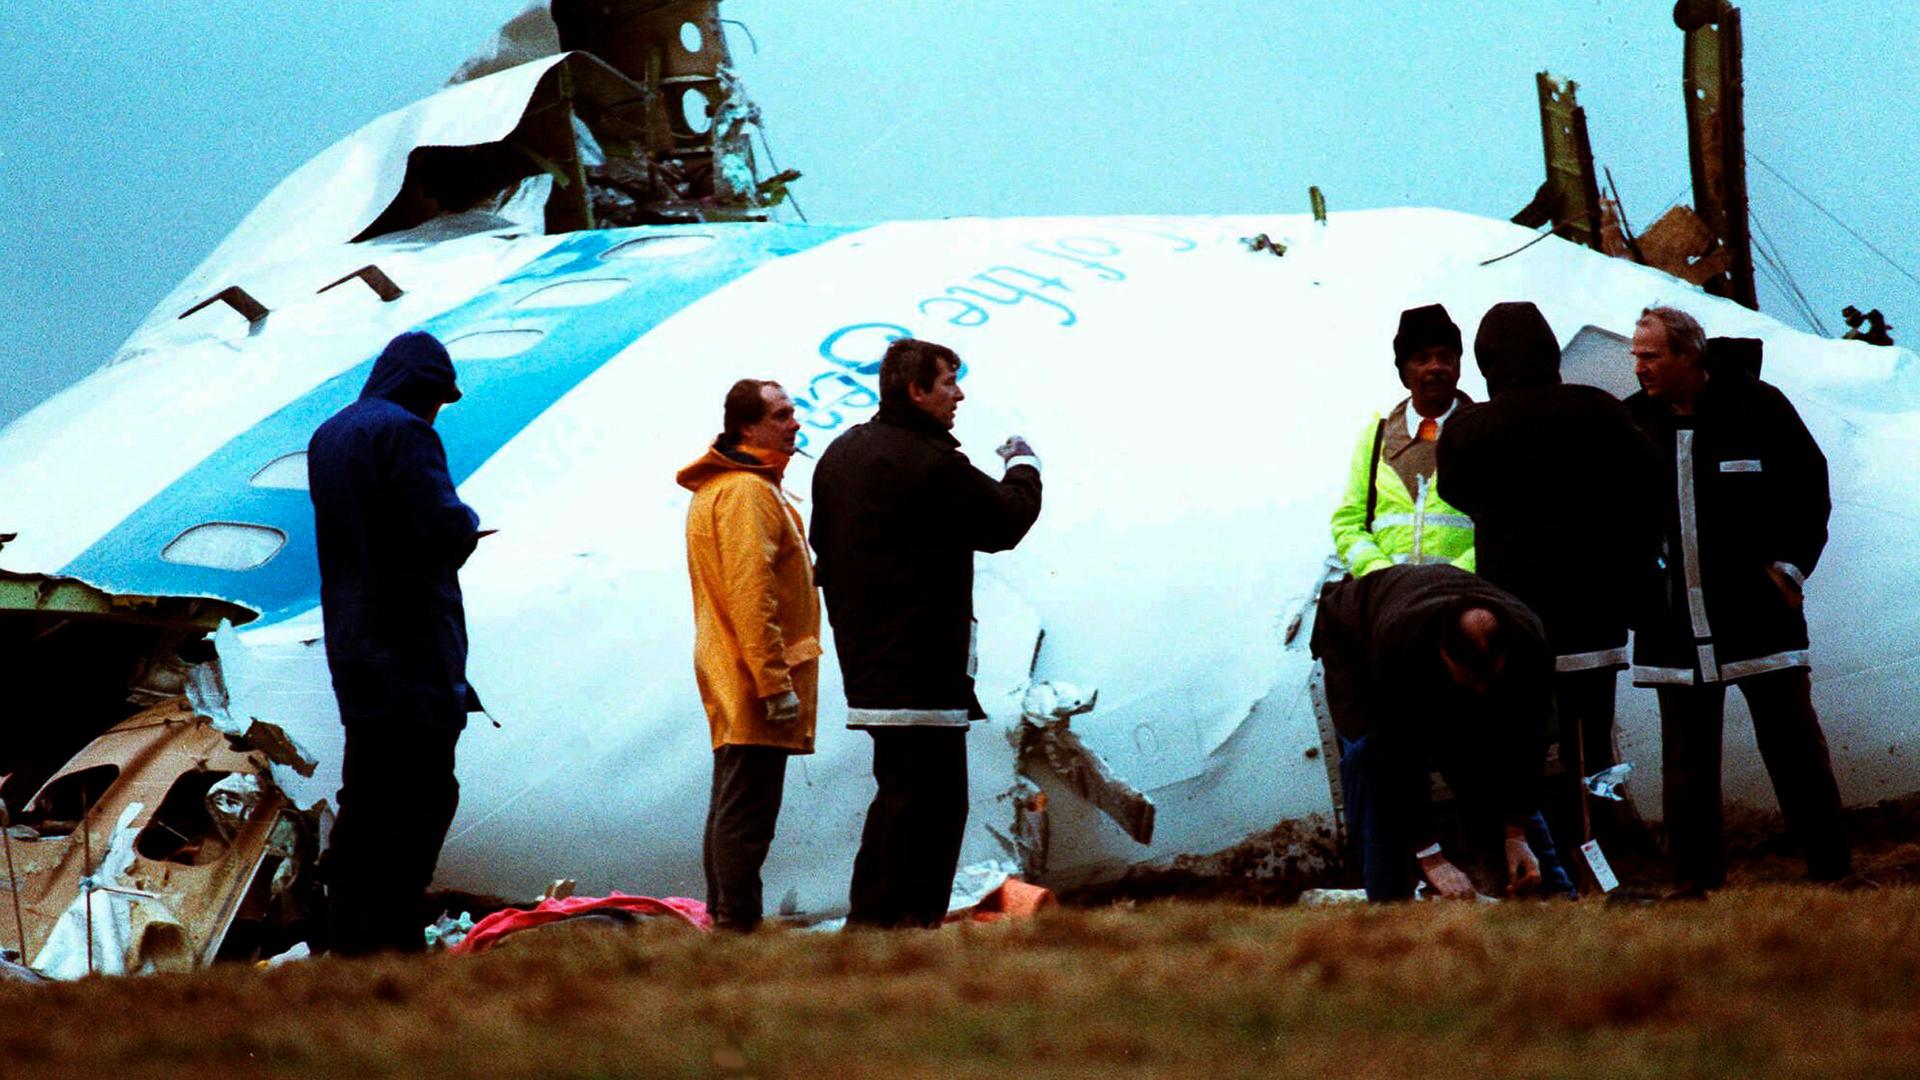 Unidentified crash investigators inspect the nose section of the crashed Pan Am flight 103 in a field near Lockerbie, Scotland, Dec. 23, 1988.